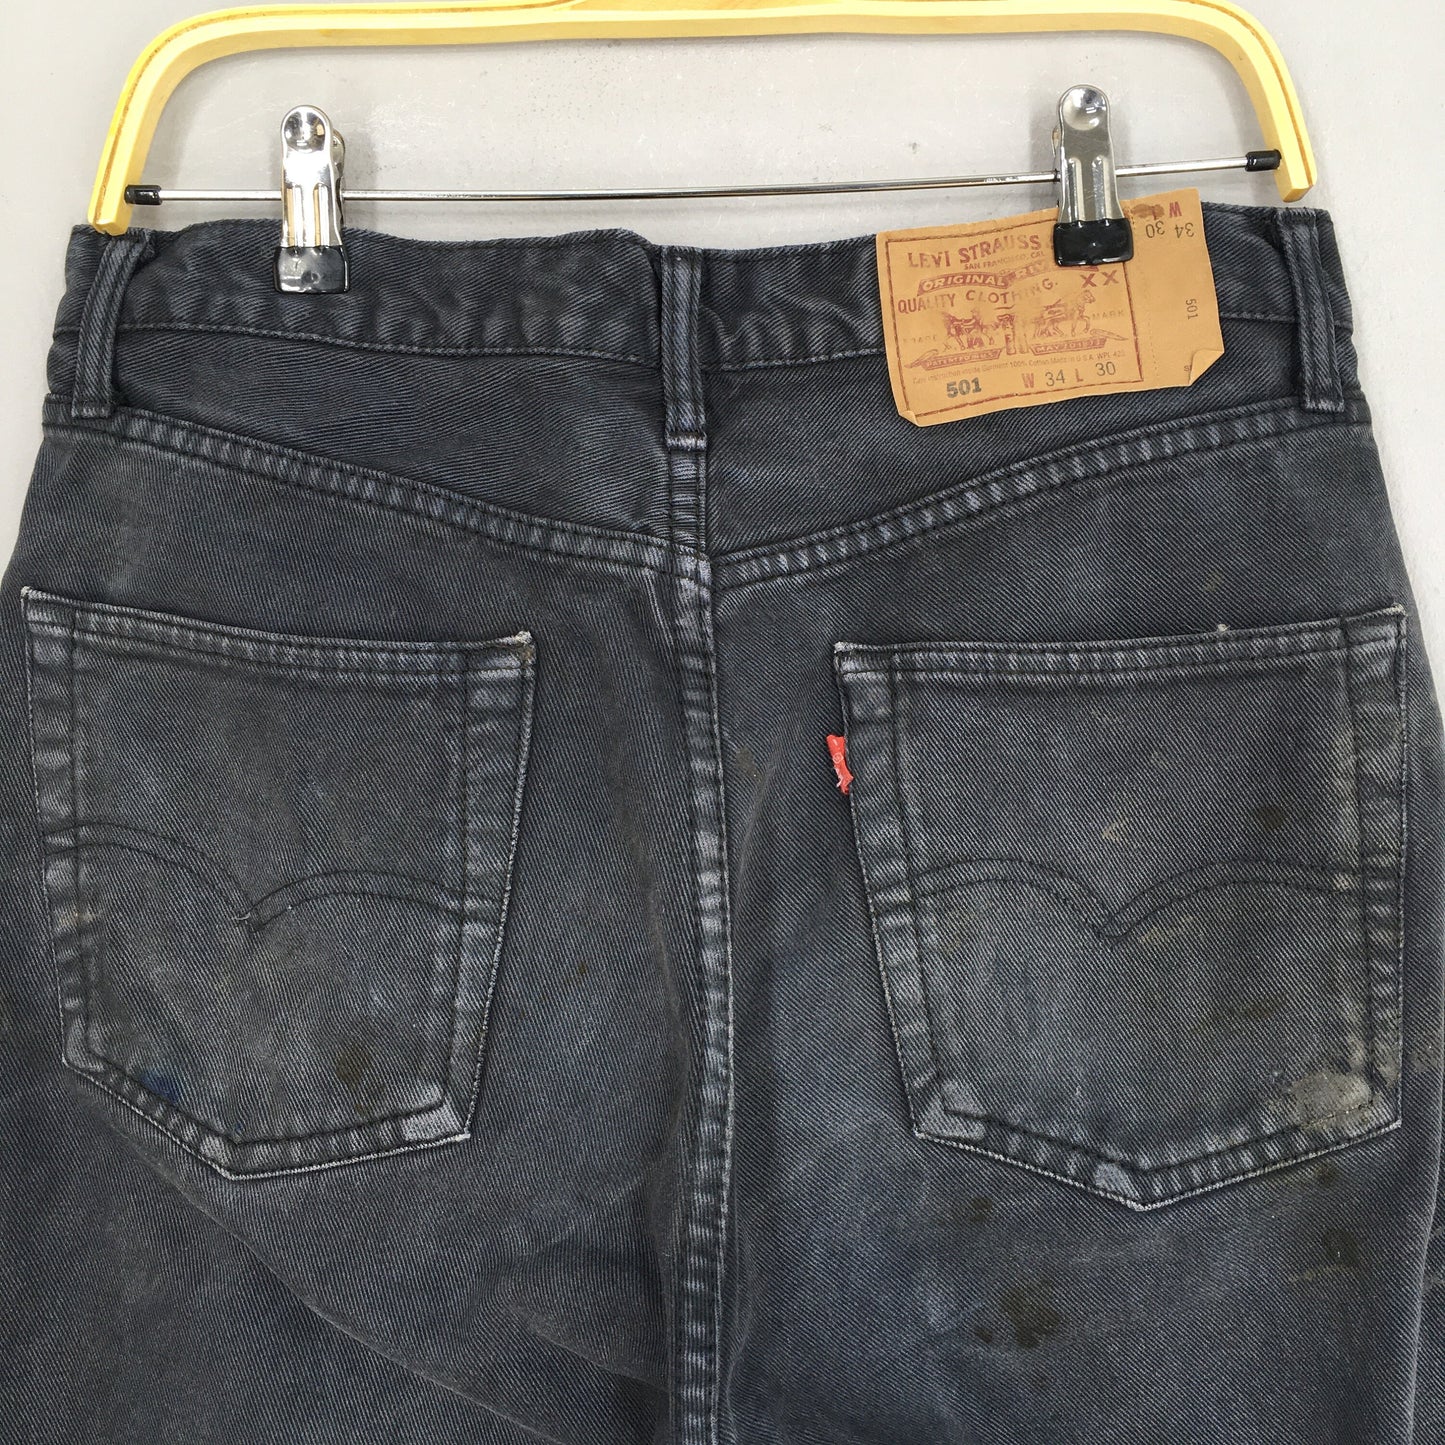 Levi's 501 Faded Dirty Black Jeans Size 32x29.5